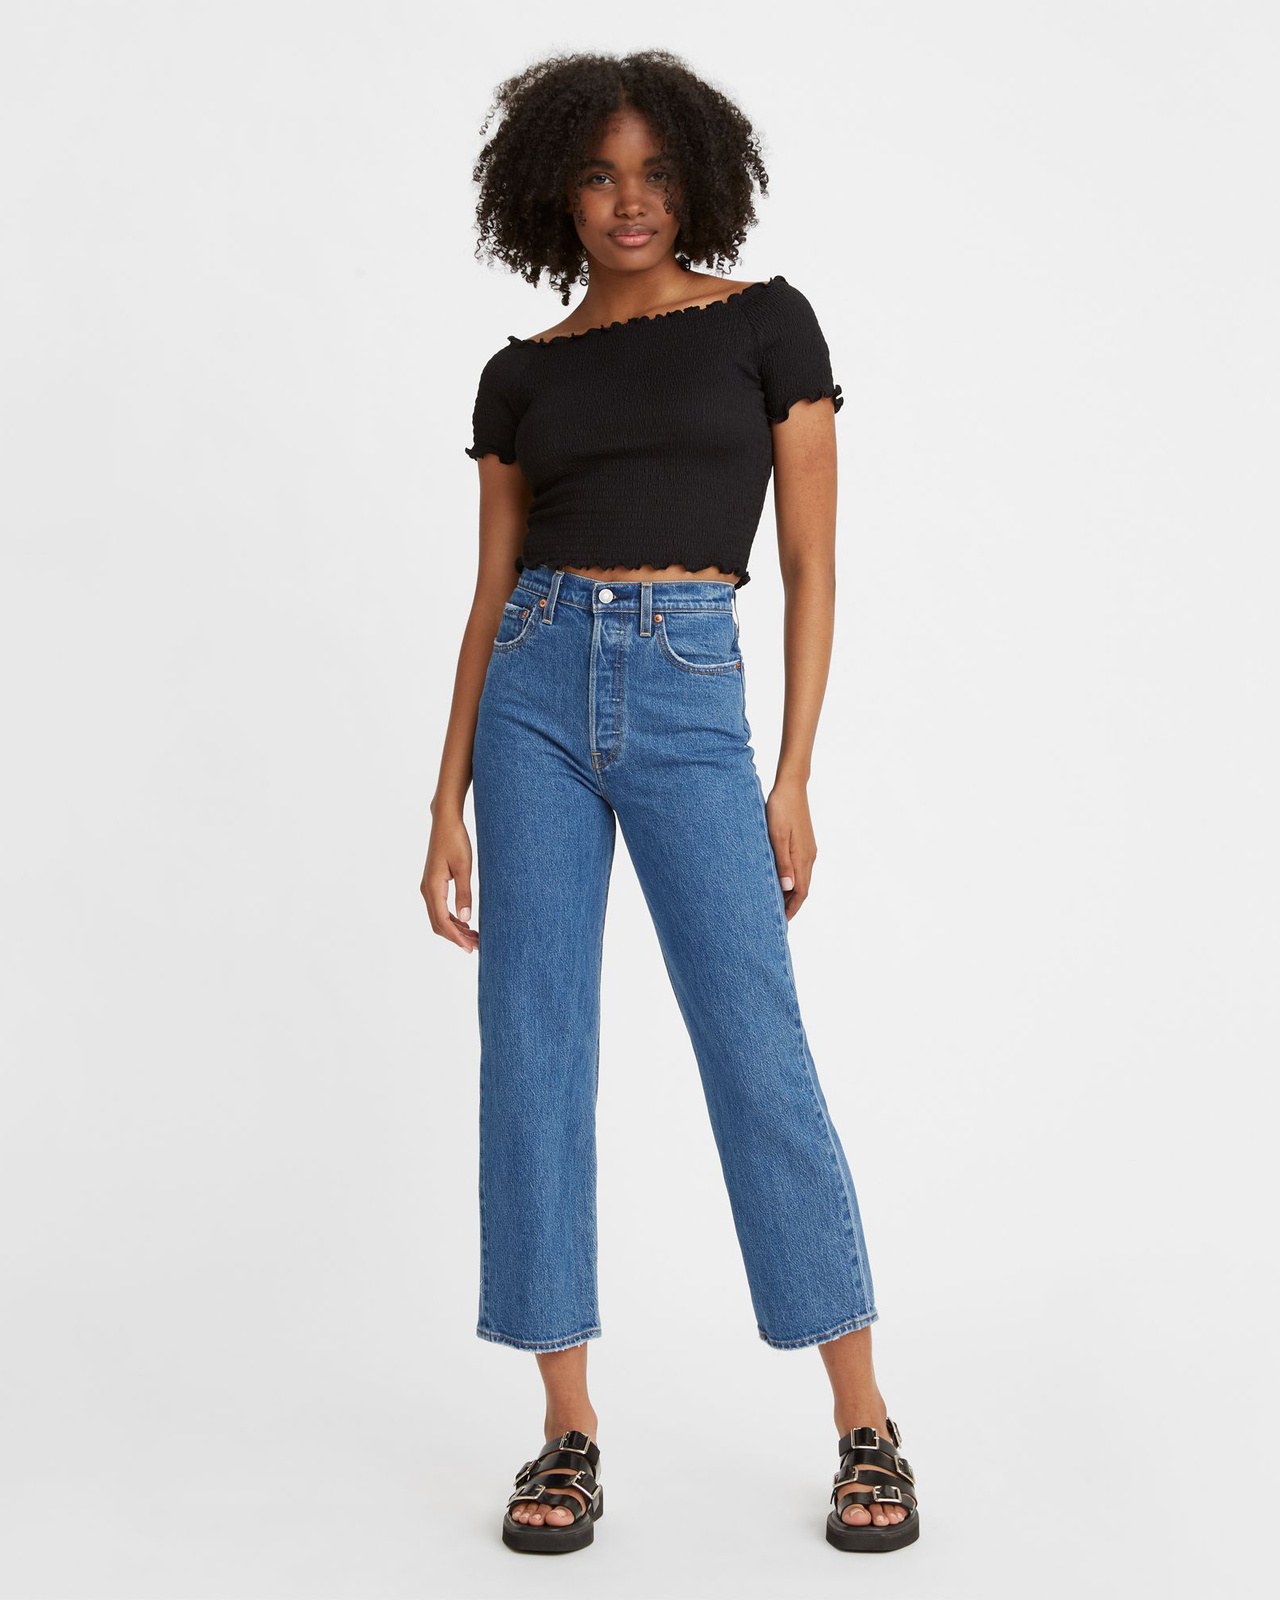 Jeans Ribcage Straight Ankle - Jazz Pop - 28/29